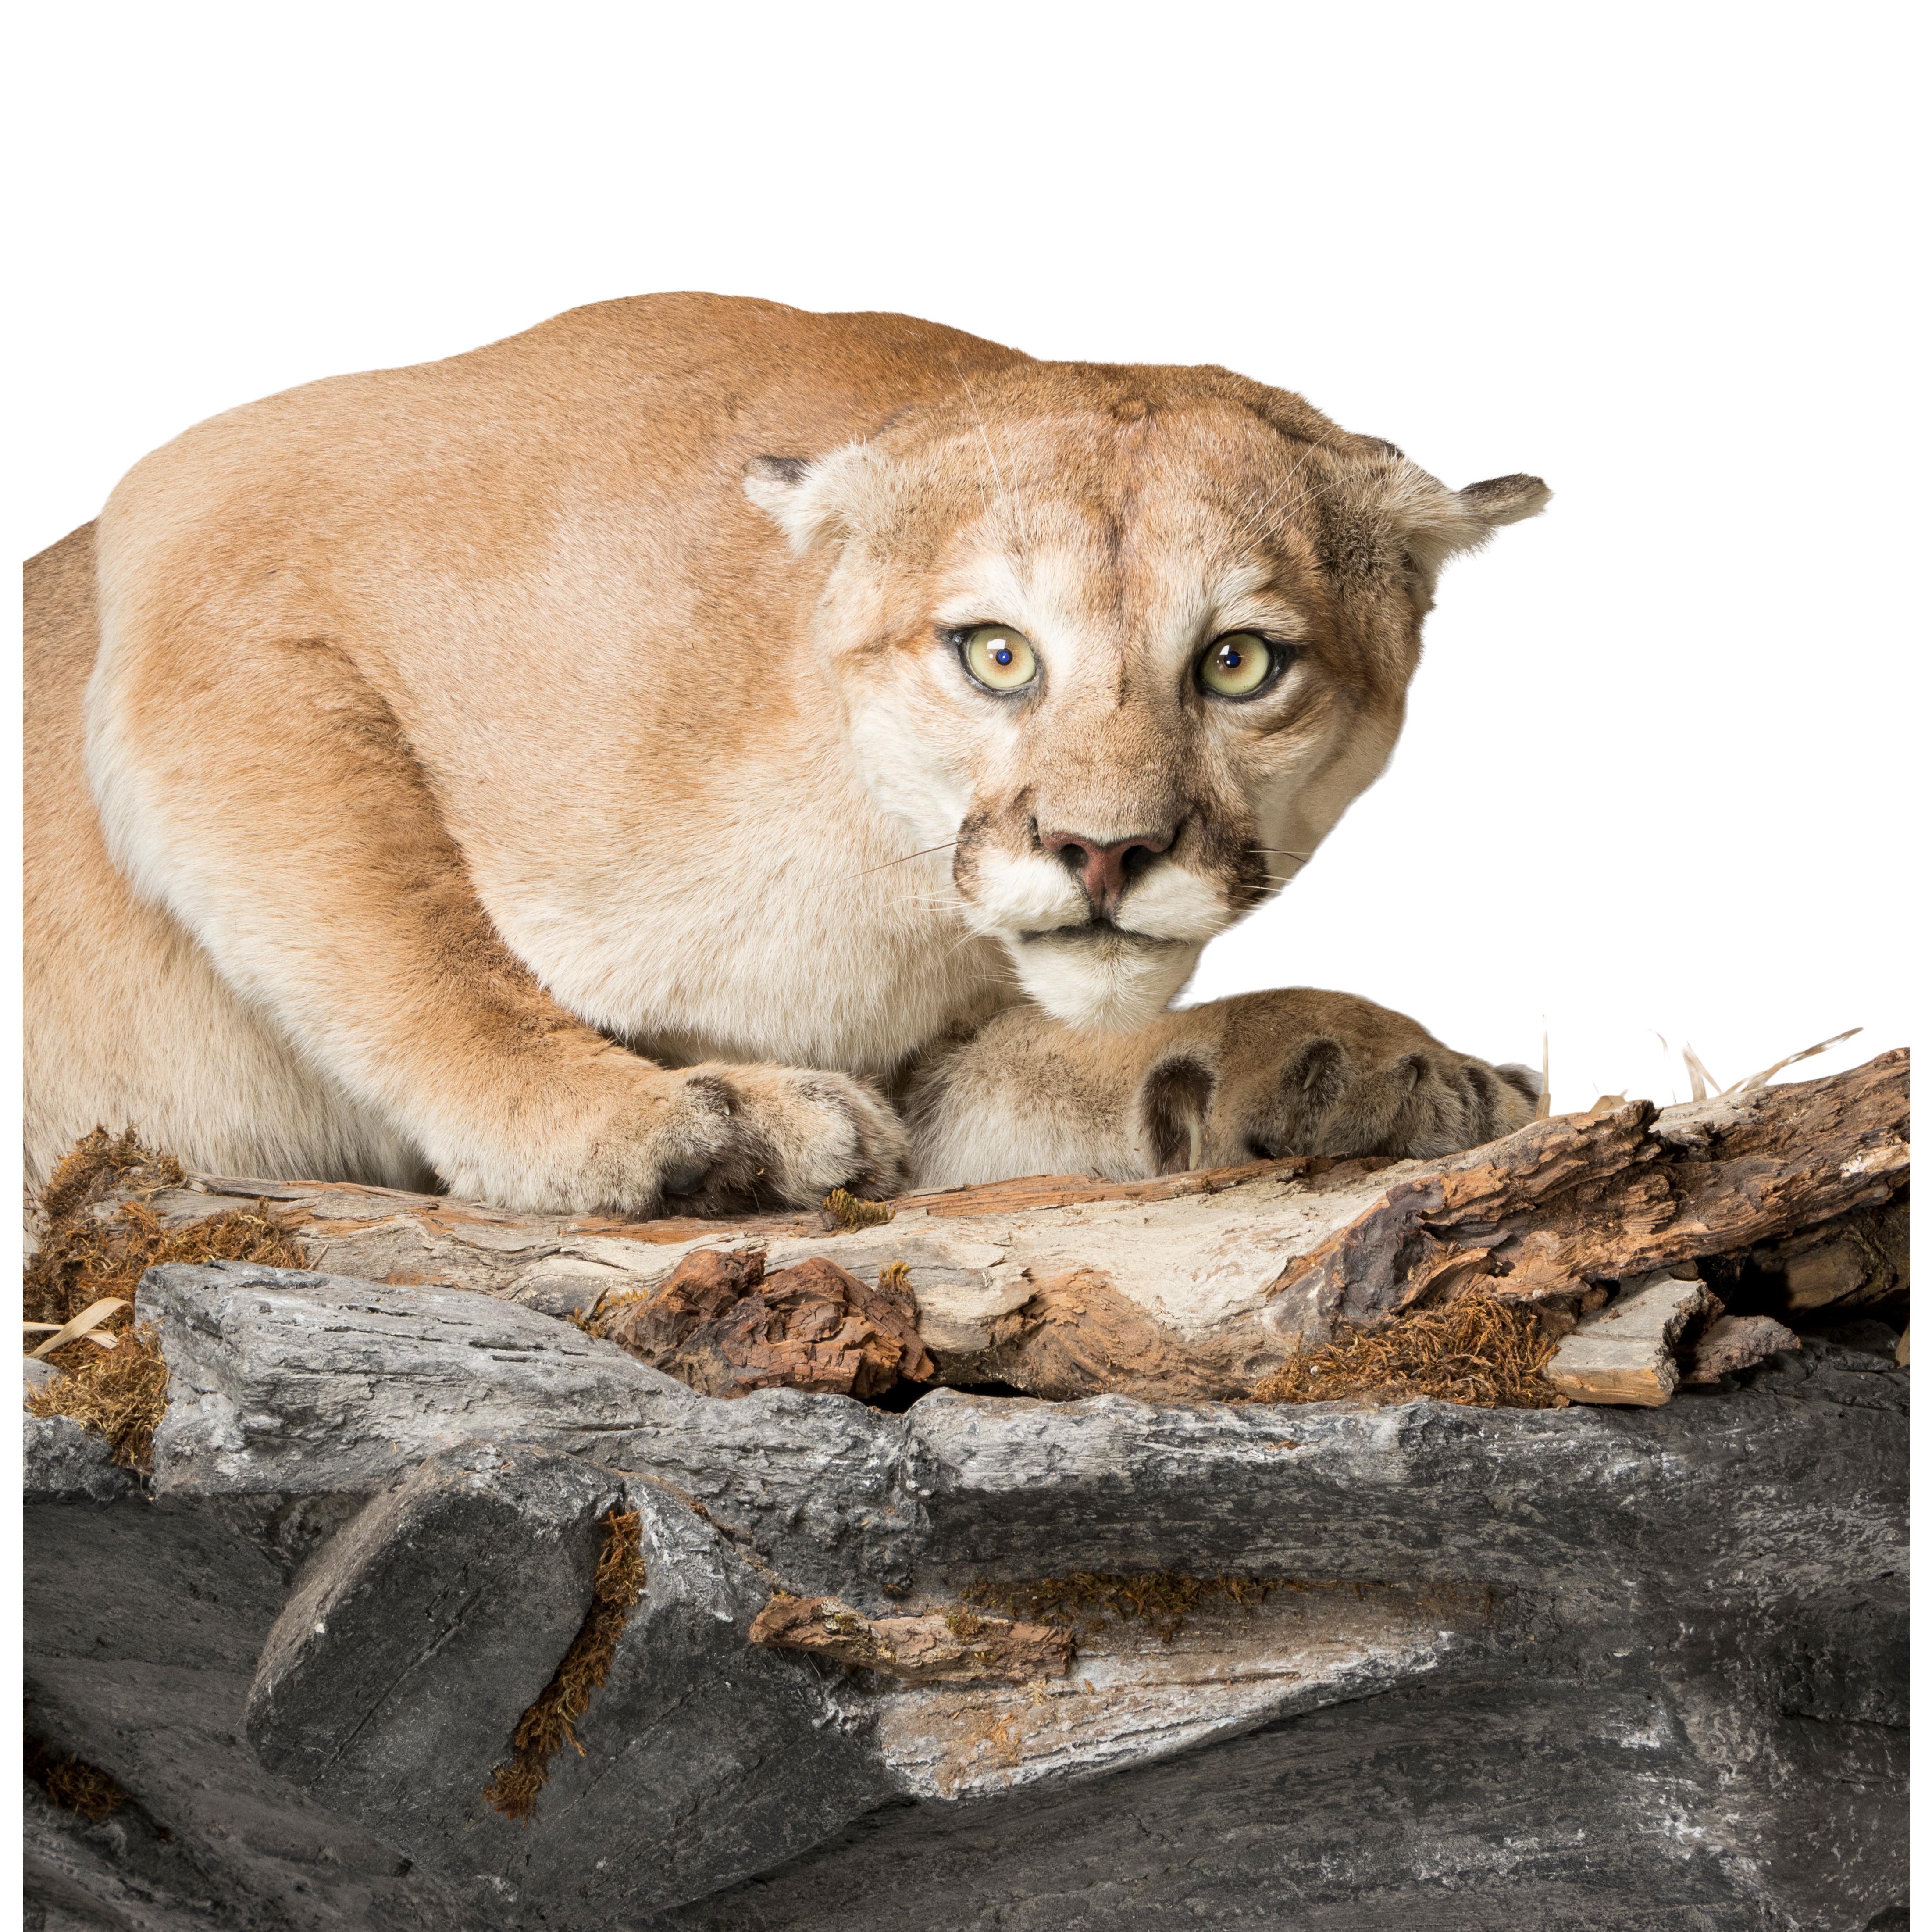 Crouching cougar on faux rock shelf. Harvested in British Columbia. 6’W x 36”H protrudes 26”.

PERIOD: Contemporary
ORIGIN: British Columbia, Canada
SIZE: 6’W x 36”H protrudes 26”.

Cisco’s Gallery deals in the rare, exceptional, and